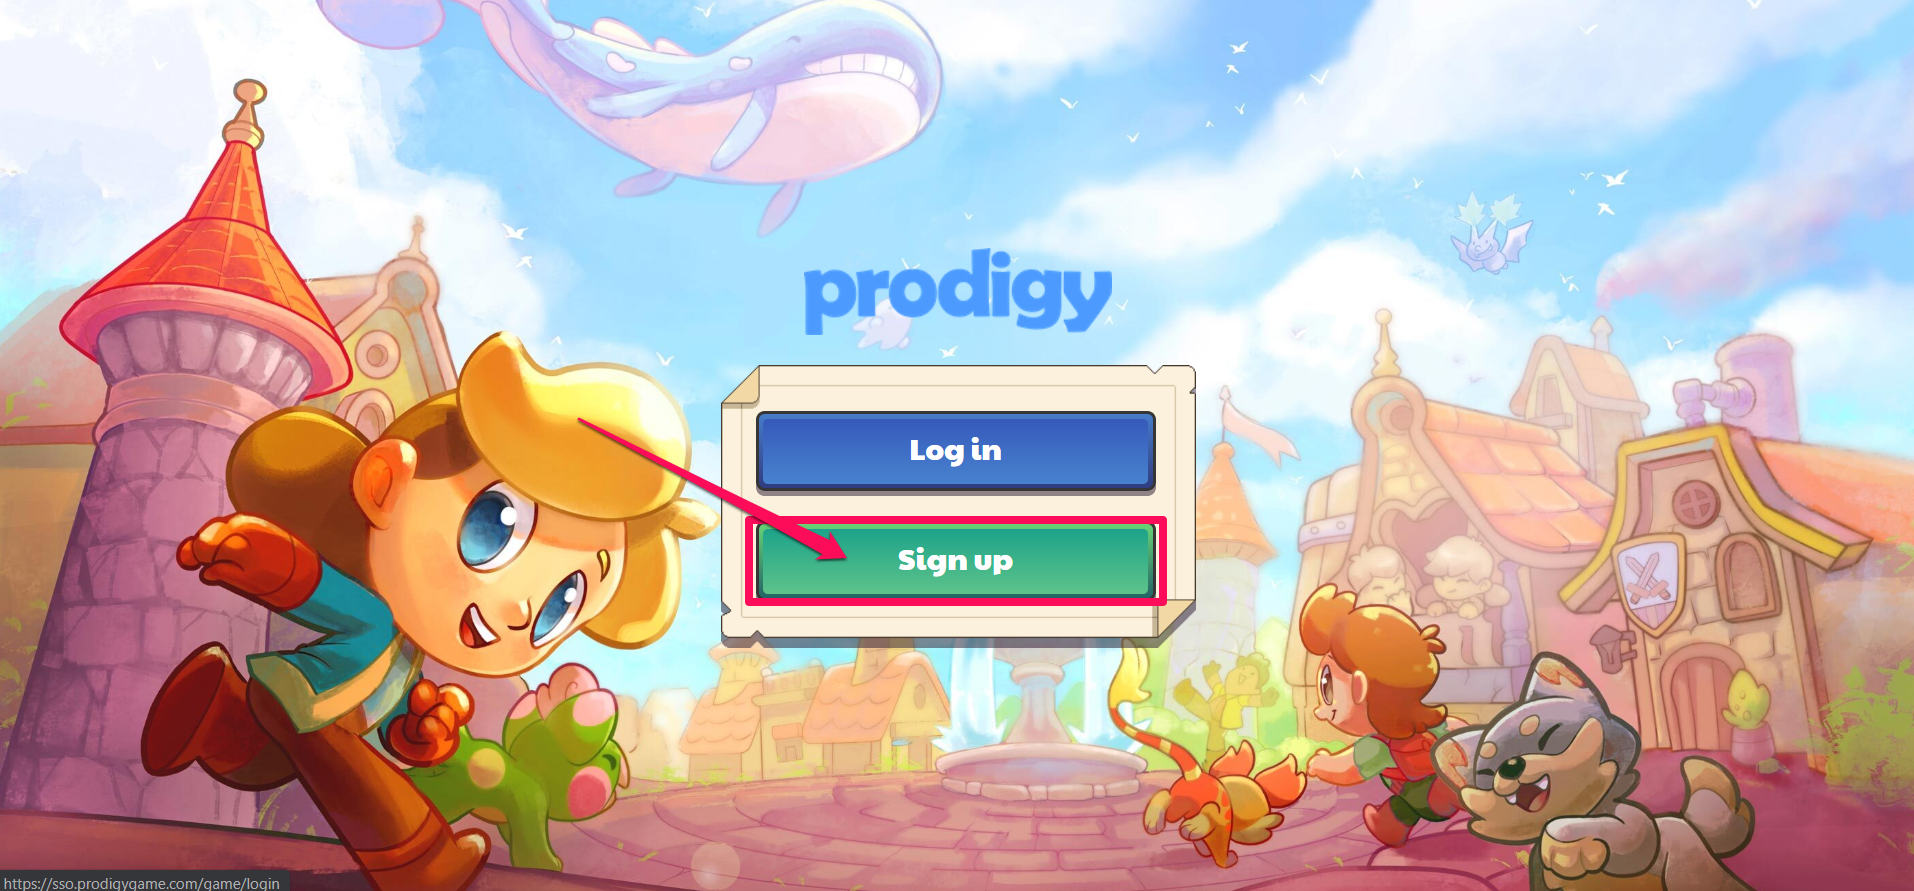 how to stop prodigy membership